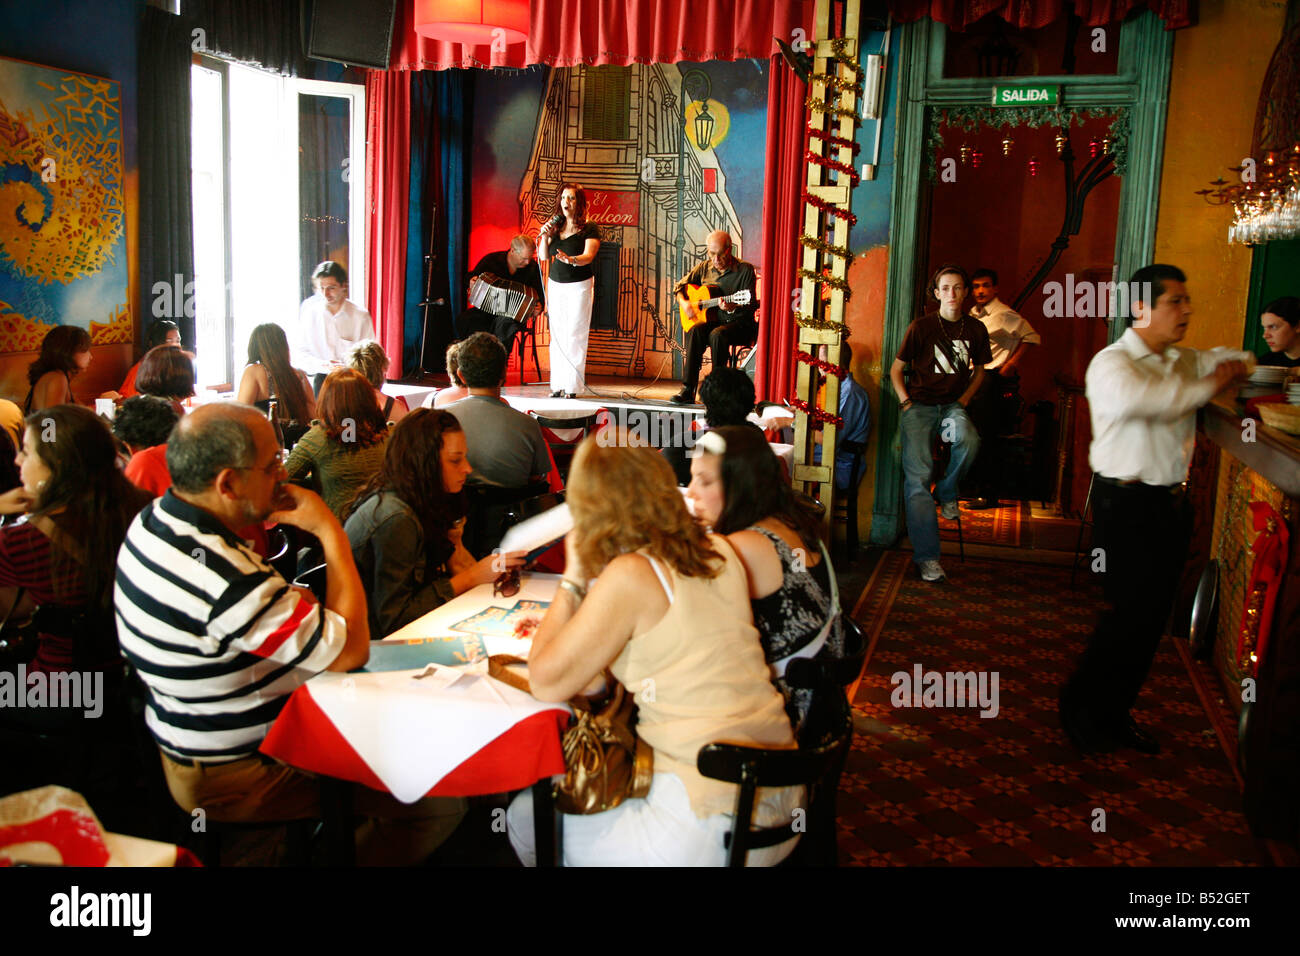 March 2008 - People sitting at a restaurant in San Telmo Buenos Aires Argentina Stock Photo